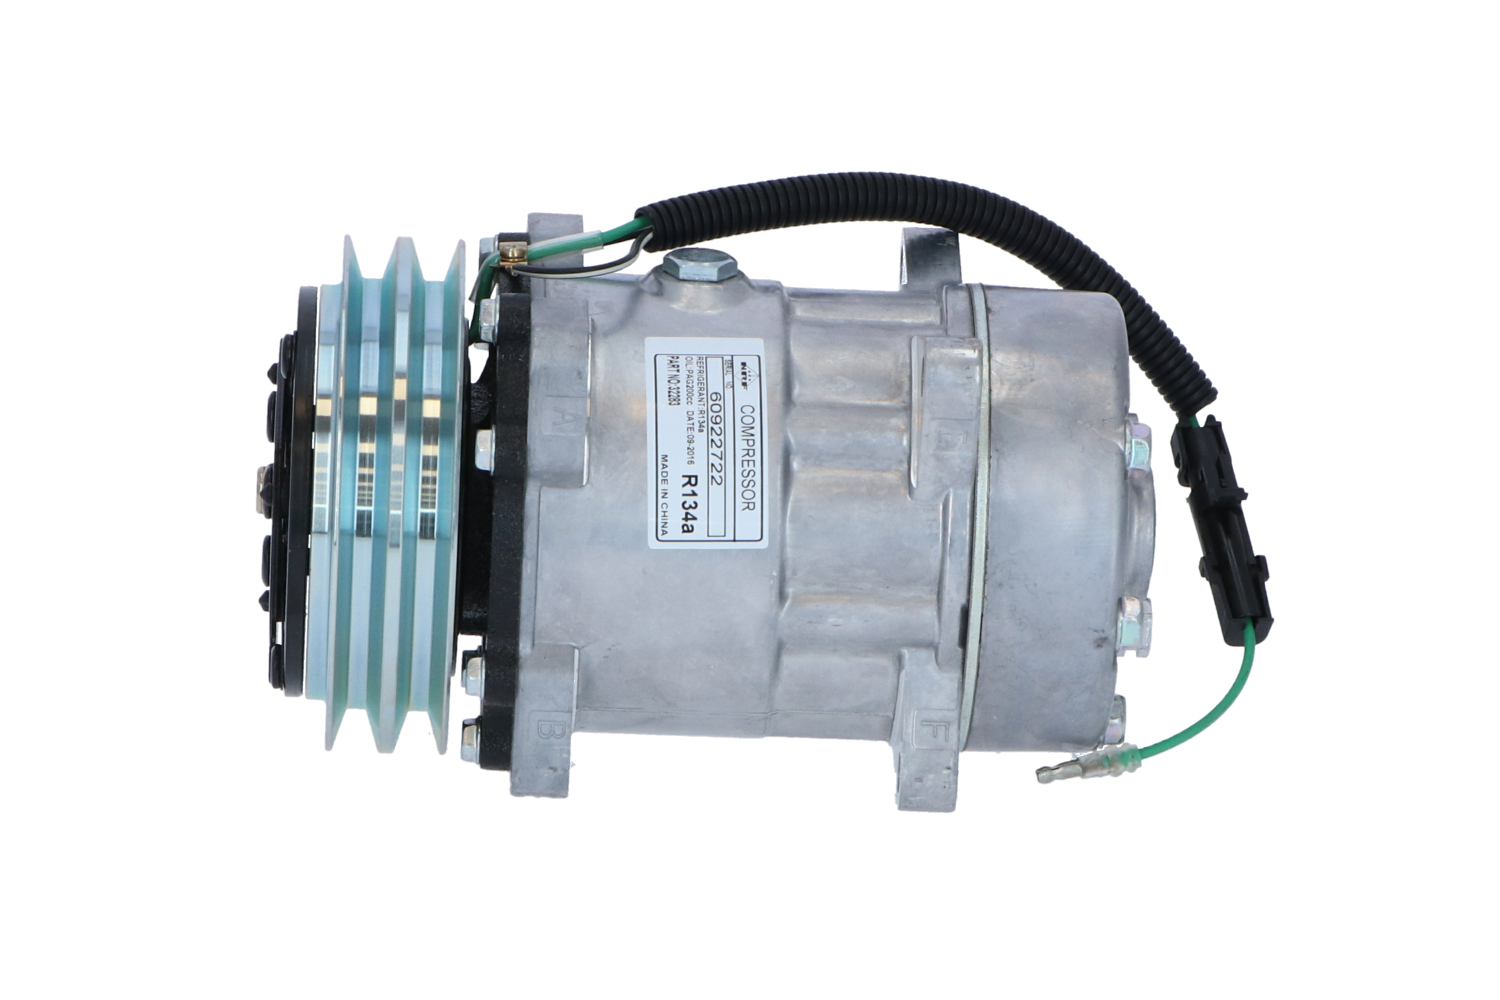 NRF 32283 Air conditioning compressor SD7H15 FLX, PAG 100, R 134a, with PAG compressor oil